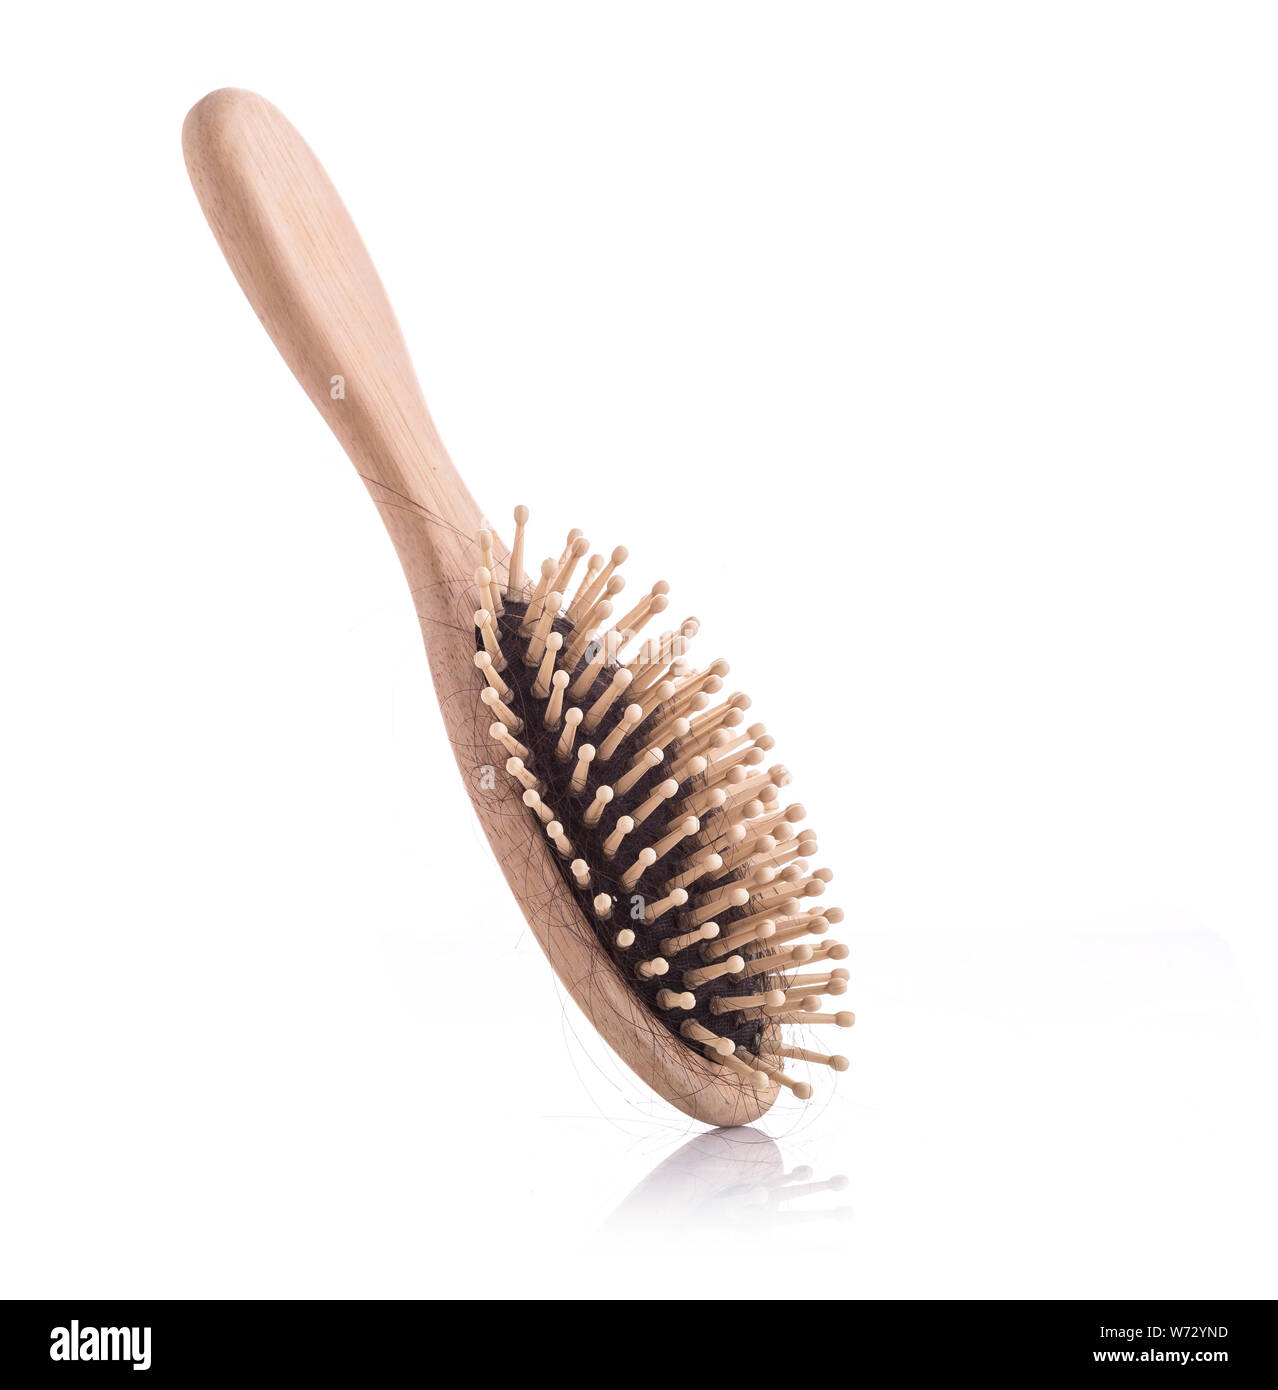 Wooden comb with black hair loss problem studio shot and isolated on white background Stock Photo